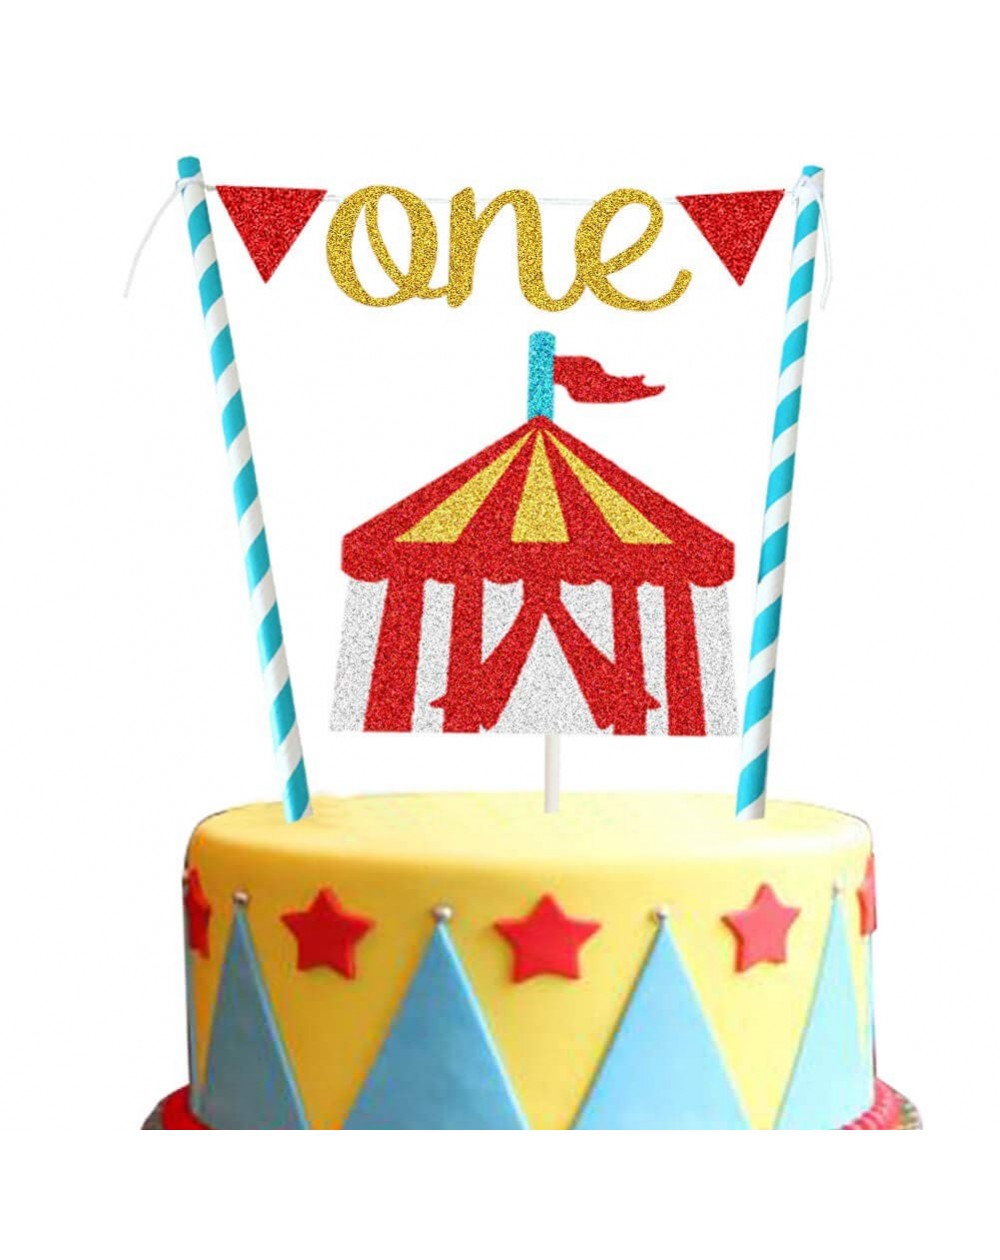 Cake & Cupcake Toppers Circus First Birthday Cake Topper for Vintage Circus Tent Big Top Theme 1st Birthday Party Decoration ...